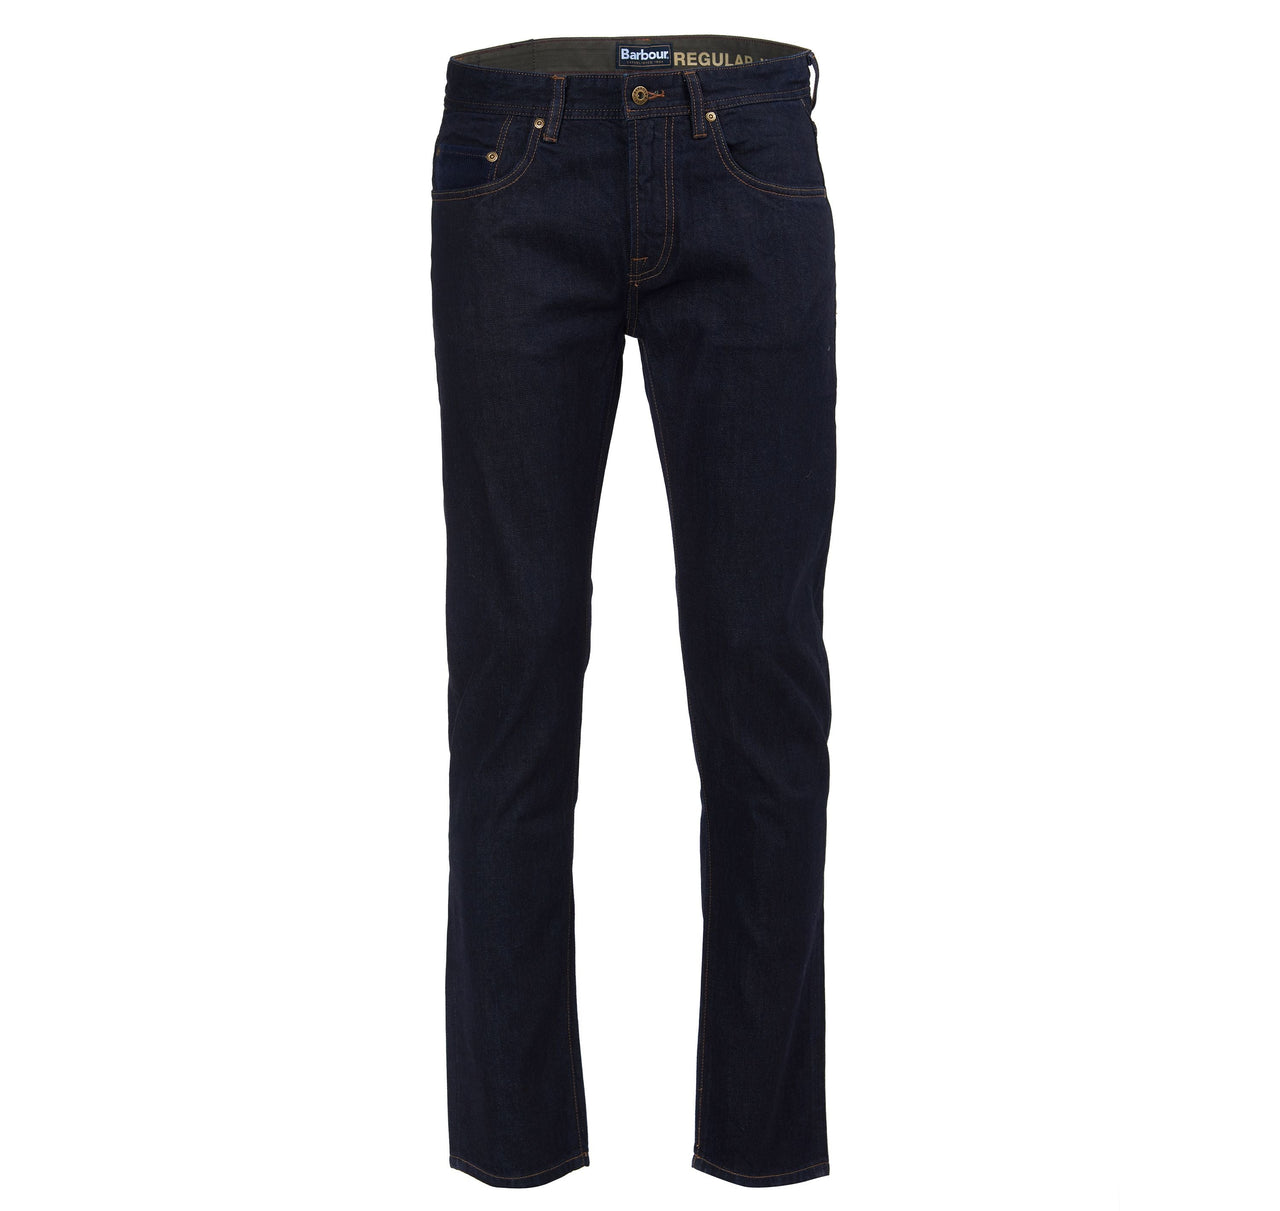 BARBOUR Regular Fit Jeans Rinse Washed